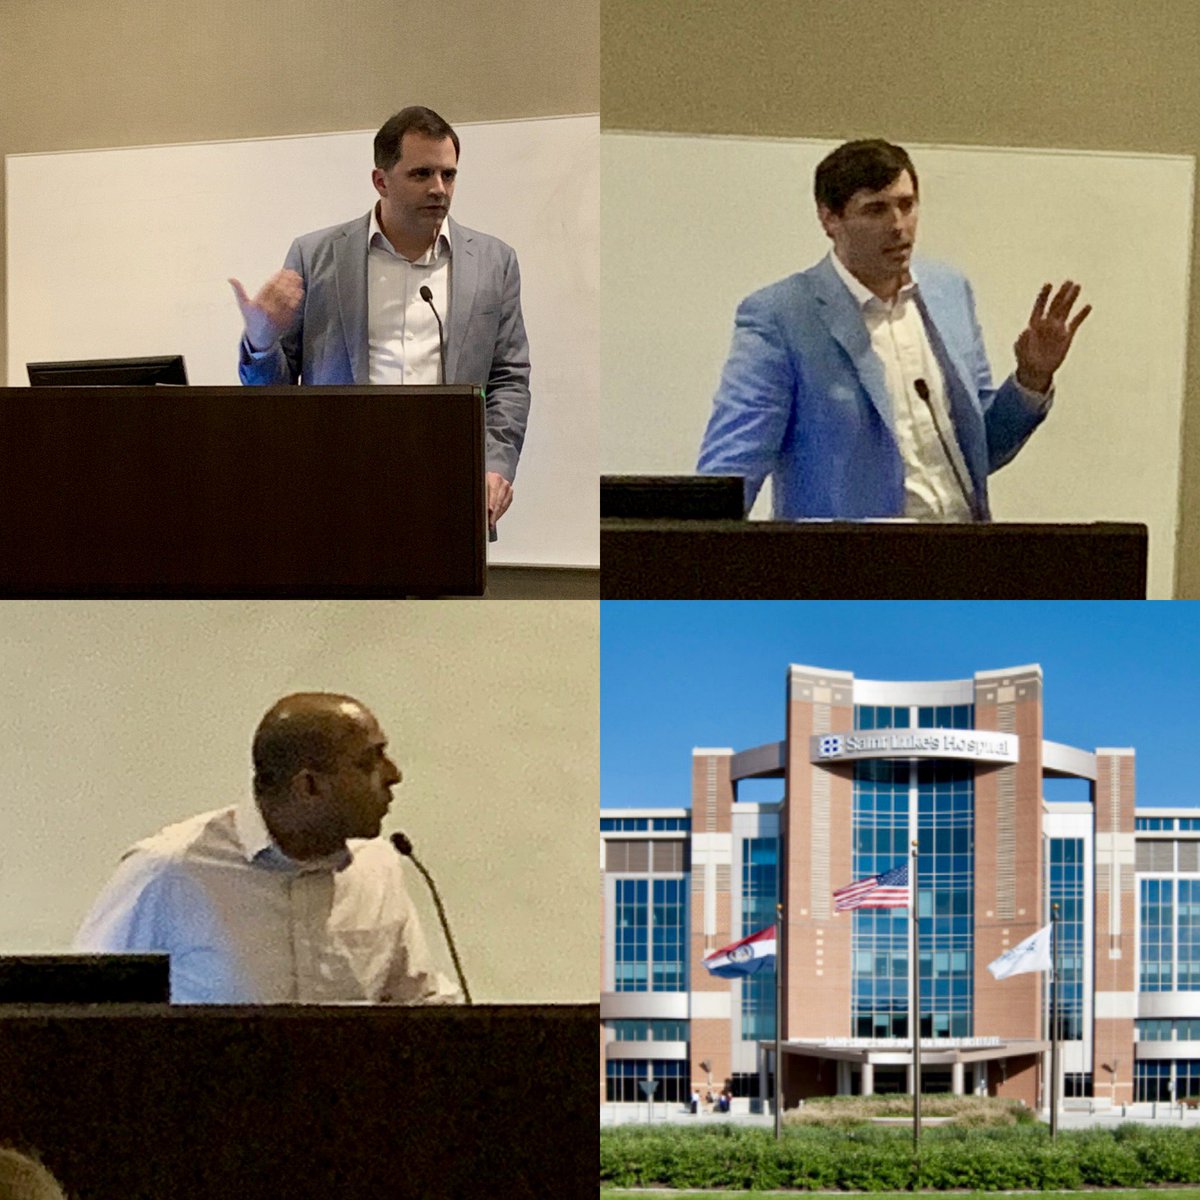 Great educational session last night at @saintlukeskc @MidAmericaHeart! Dr Anthony Hart discussed nuances of aortic stenosis on echo; @akcmahi reviewed new options and upcoming trials for valvular heart disease, and @jtsaxon presented updates on indications for PFO closure.